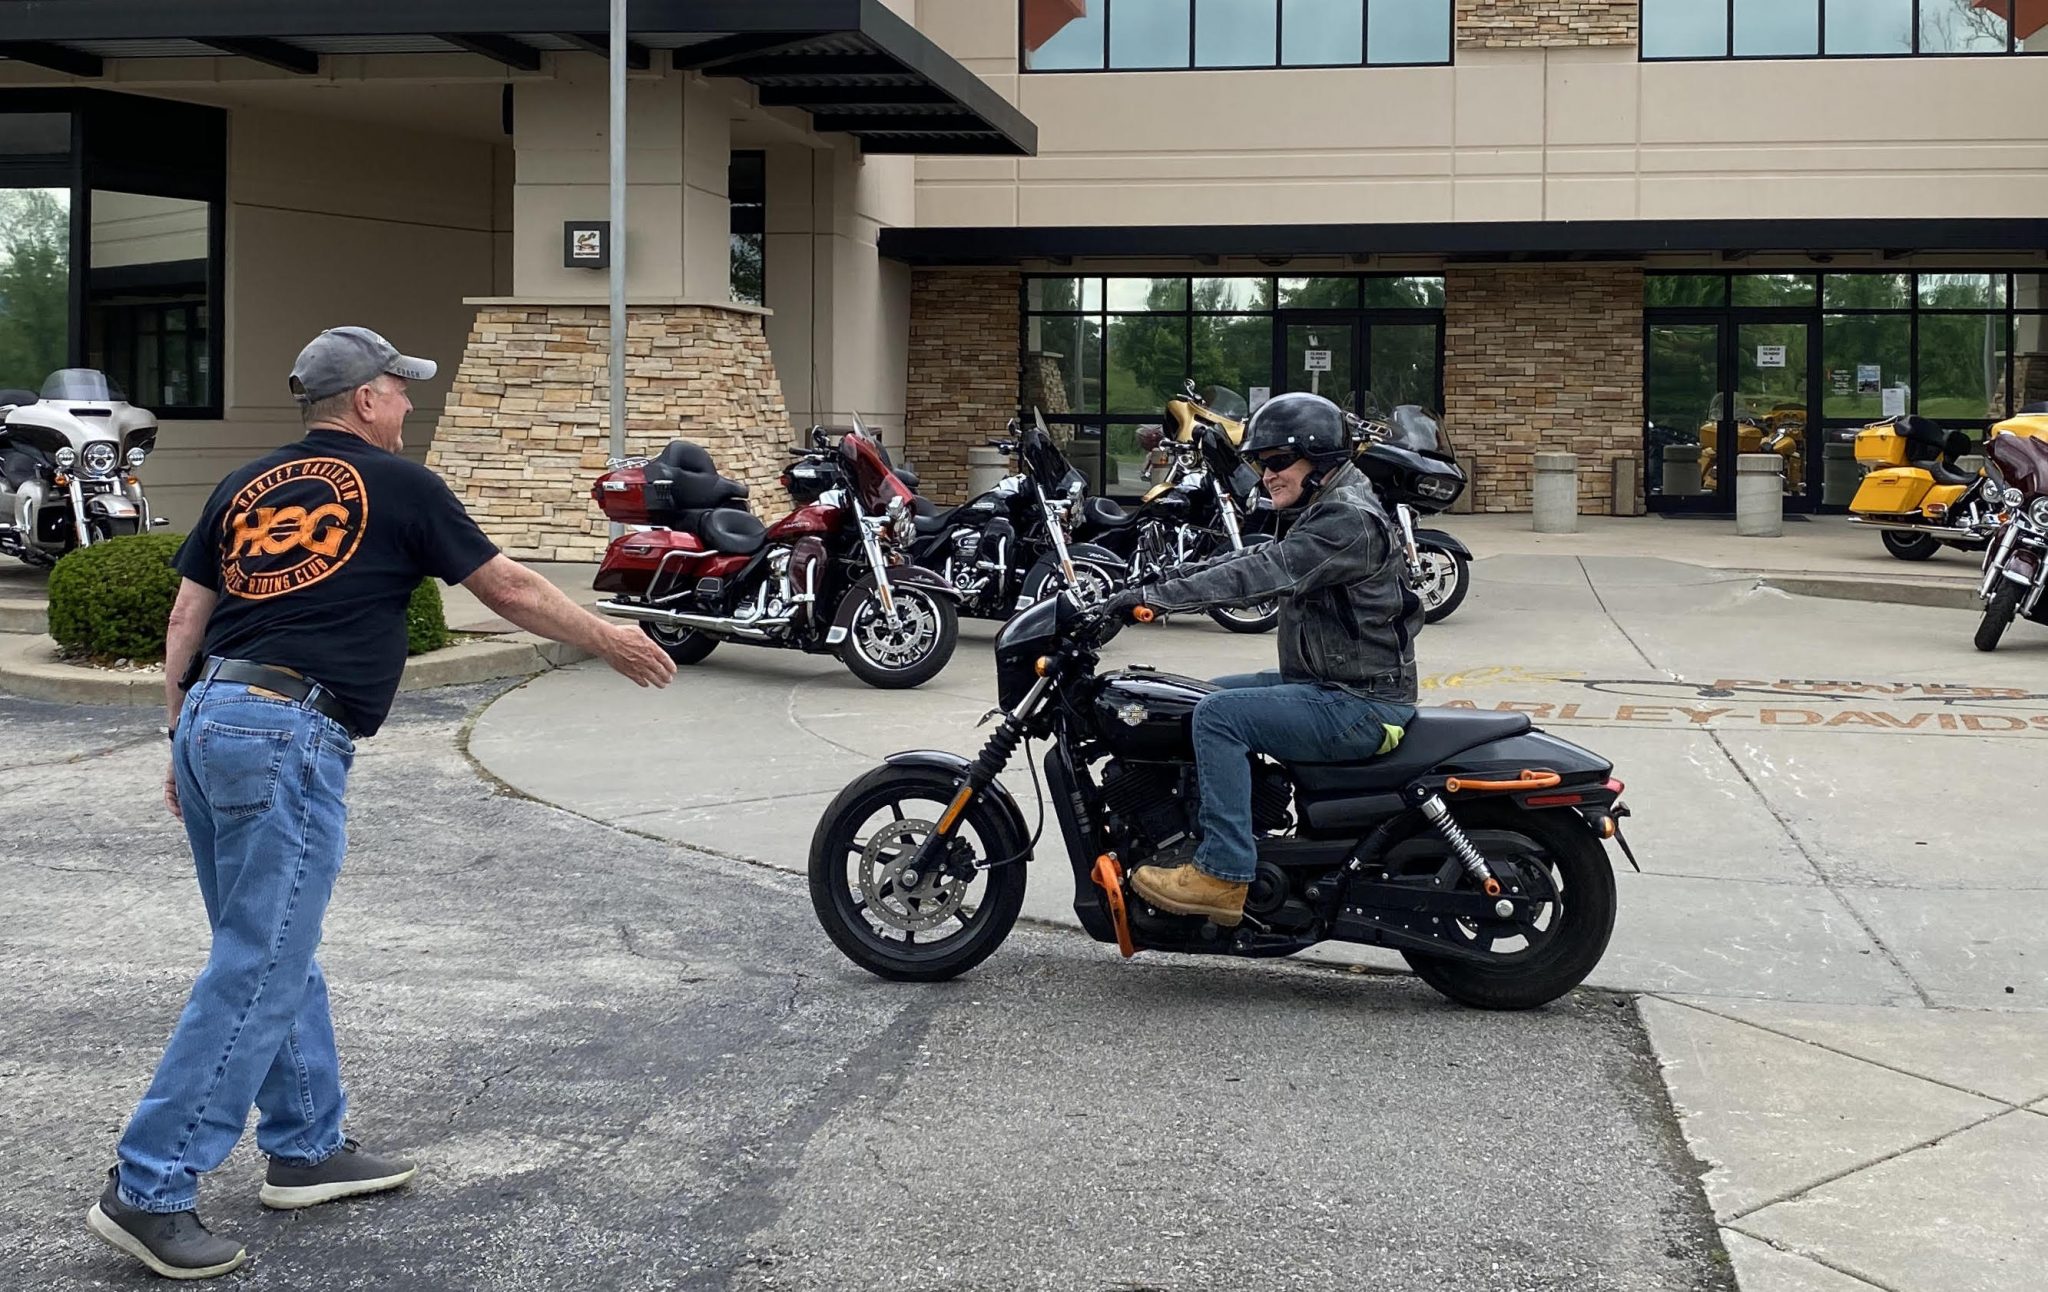 Gail's Harley Davidson: Our Motorcycle Riding Classes Are More Popular